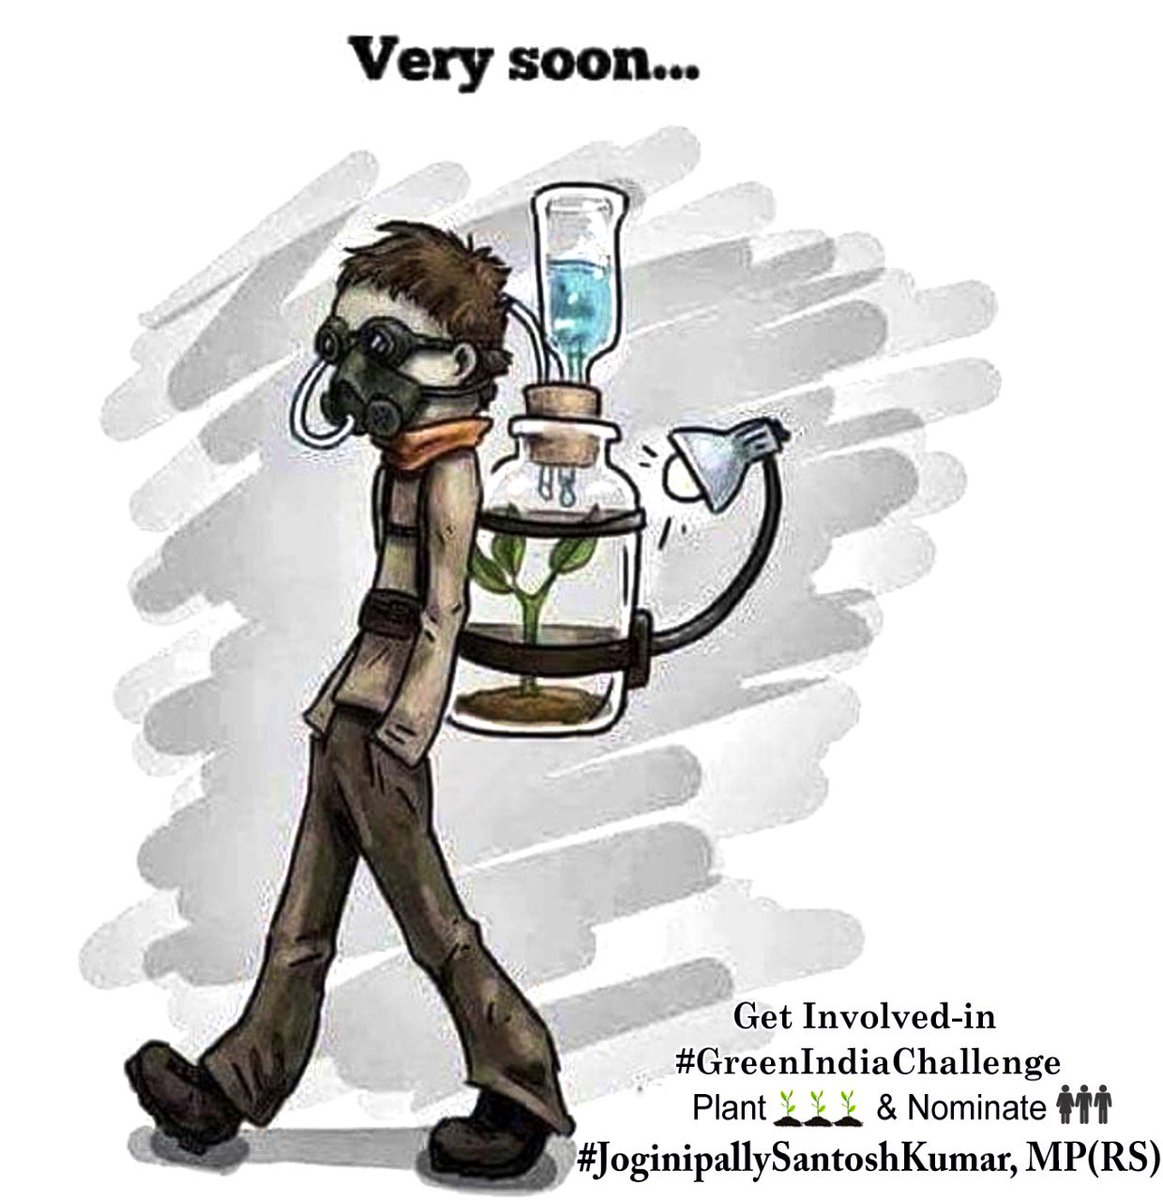 When the #water being sold
we thought it was #Fun,
Then comes da hard realty of
#Air being sold today.

Don't take it for granted.

“#OxygenBar opened in #Delhi,
Rs.299 for 15 mins of Inhailing 
90% pure Oxygen”

 I foresee this in da near #Future,
if we do not act right now🌱
👇